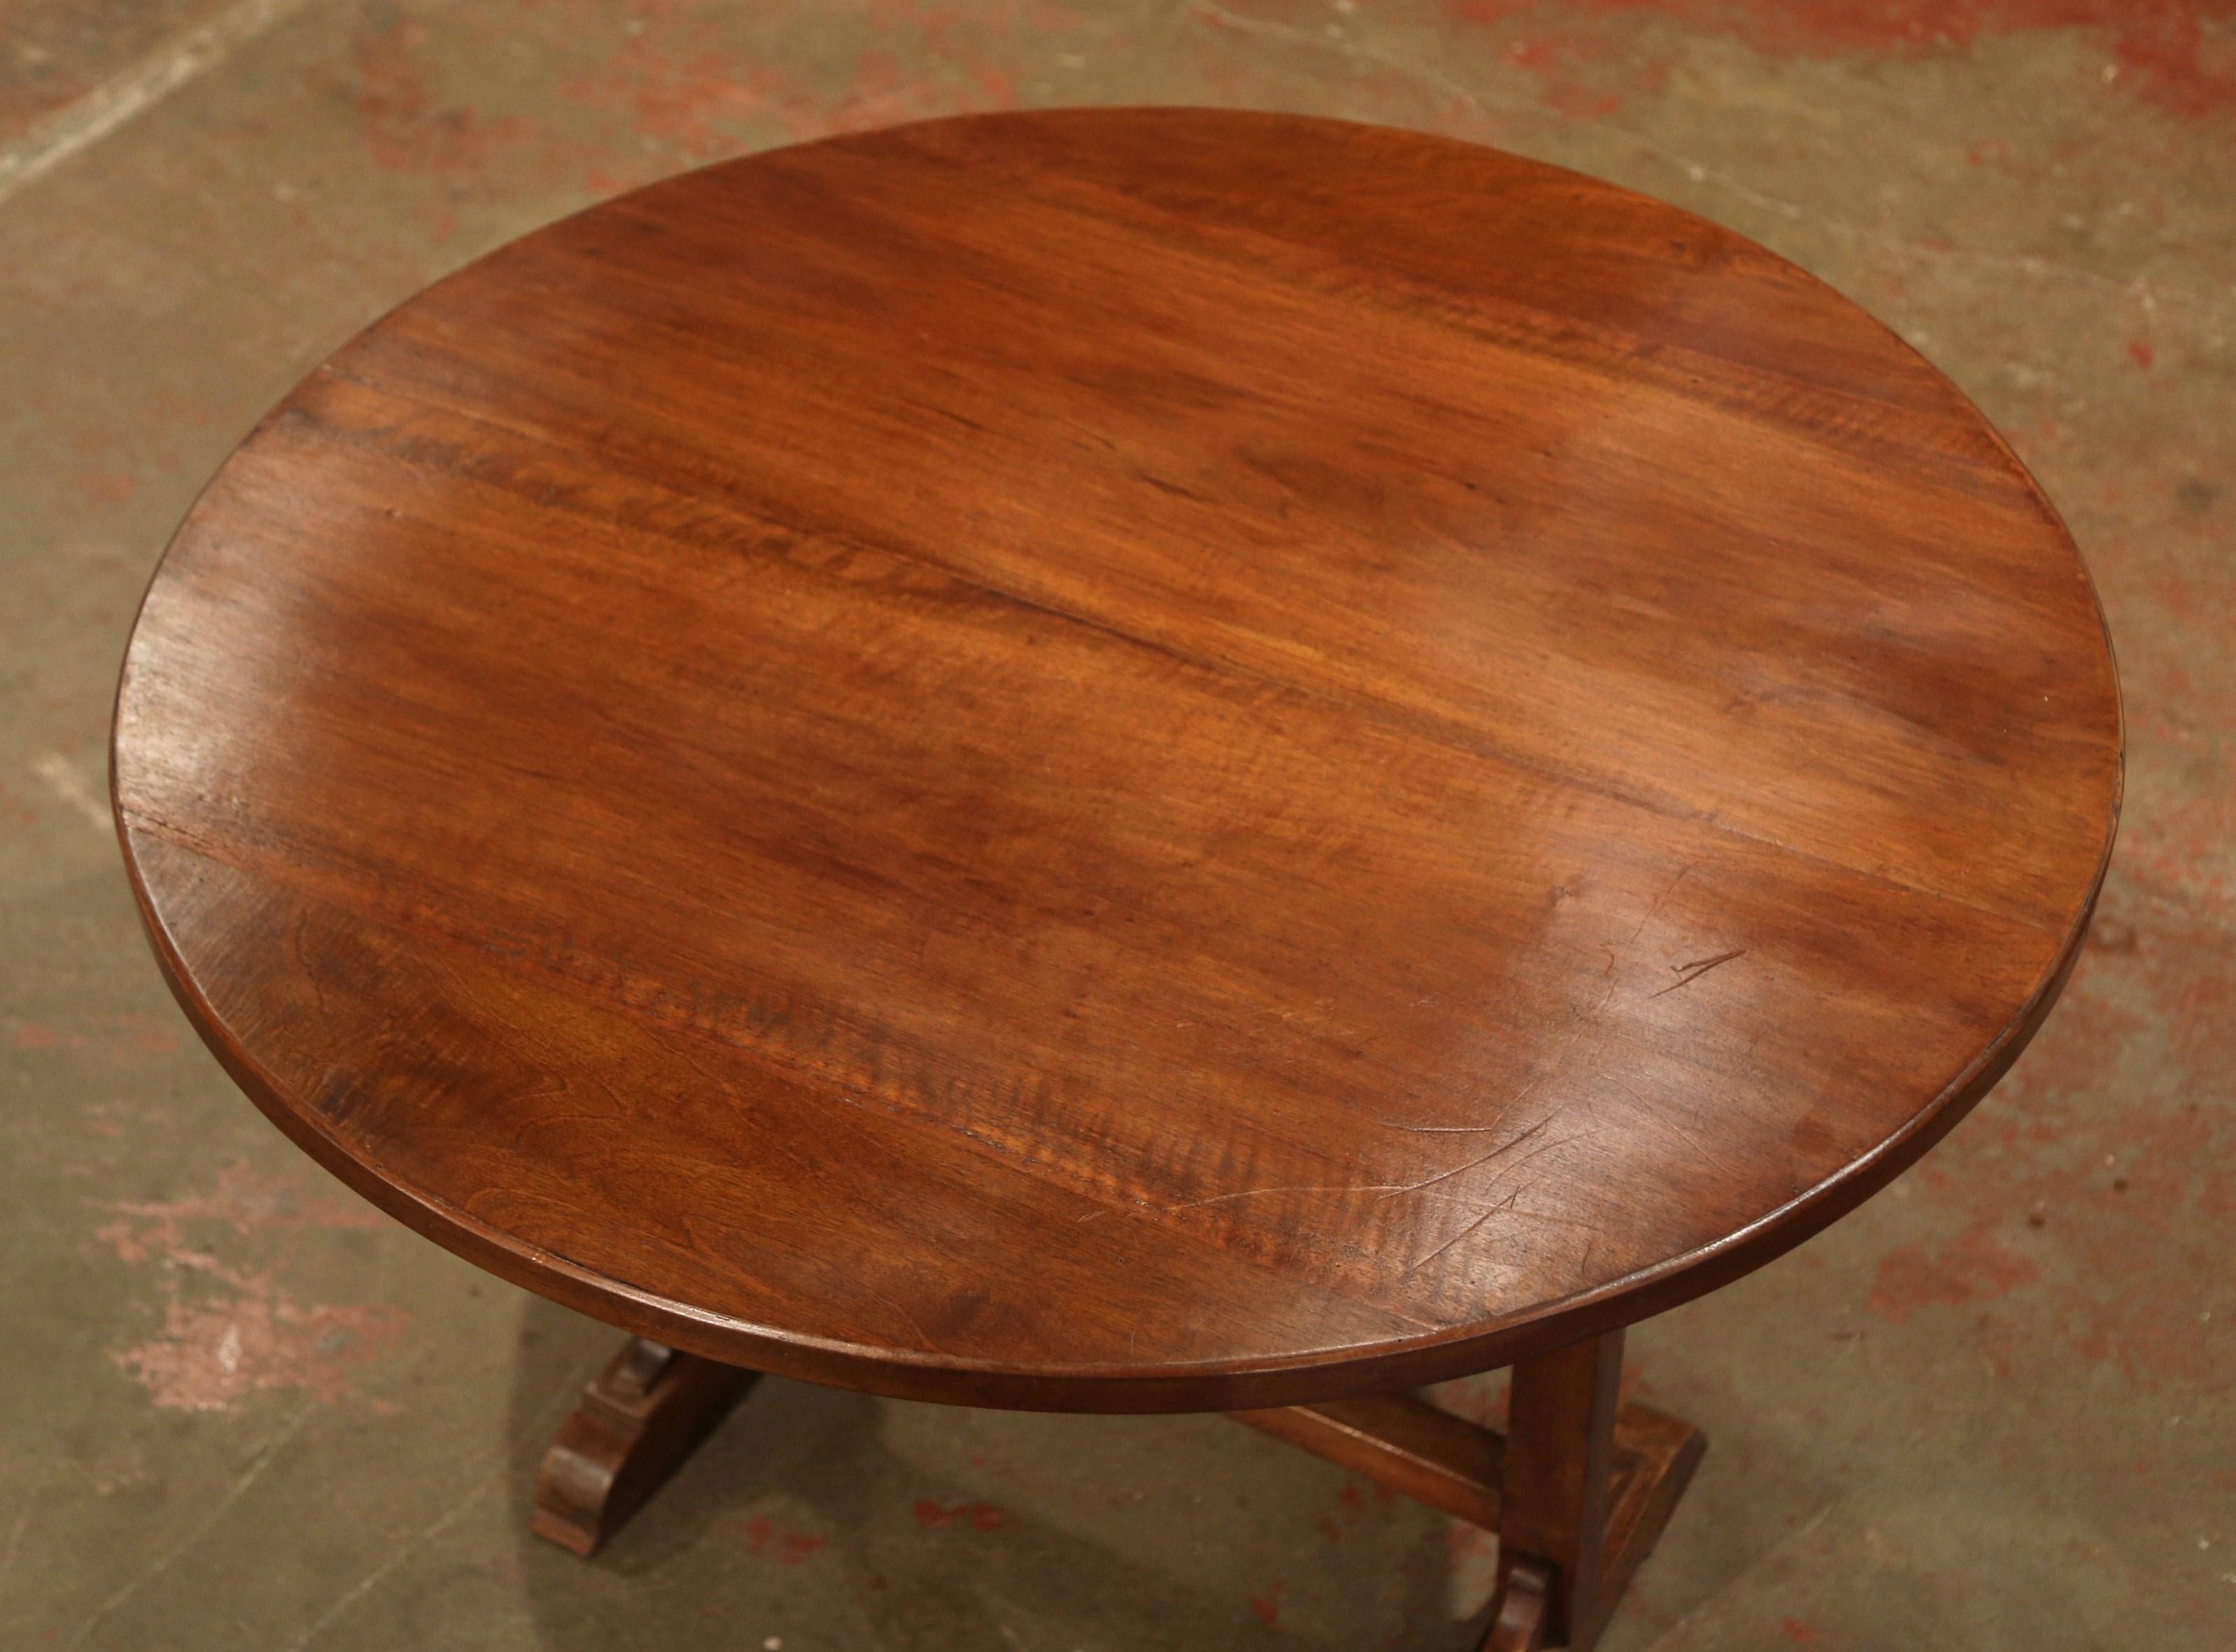 Patinated 19th Century French Carved Walnut Tilt-Top Wine Tasting Table from Bordeaux